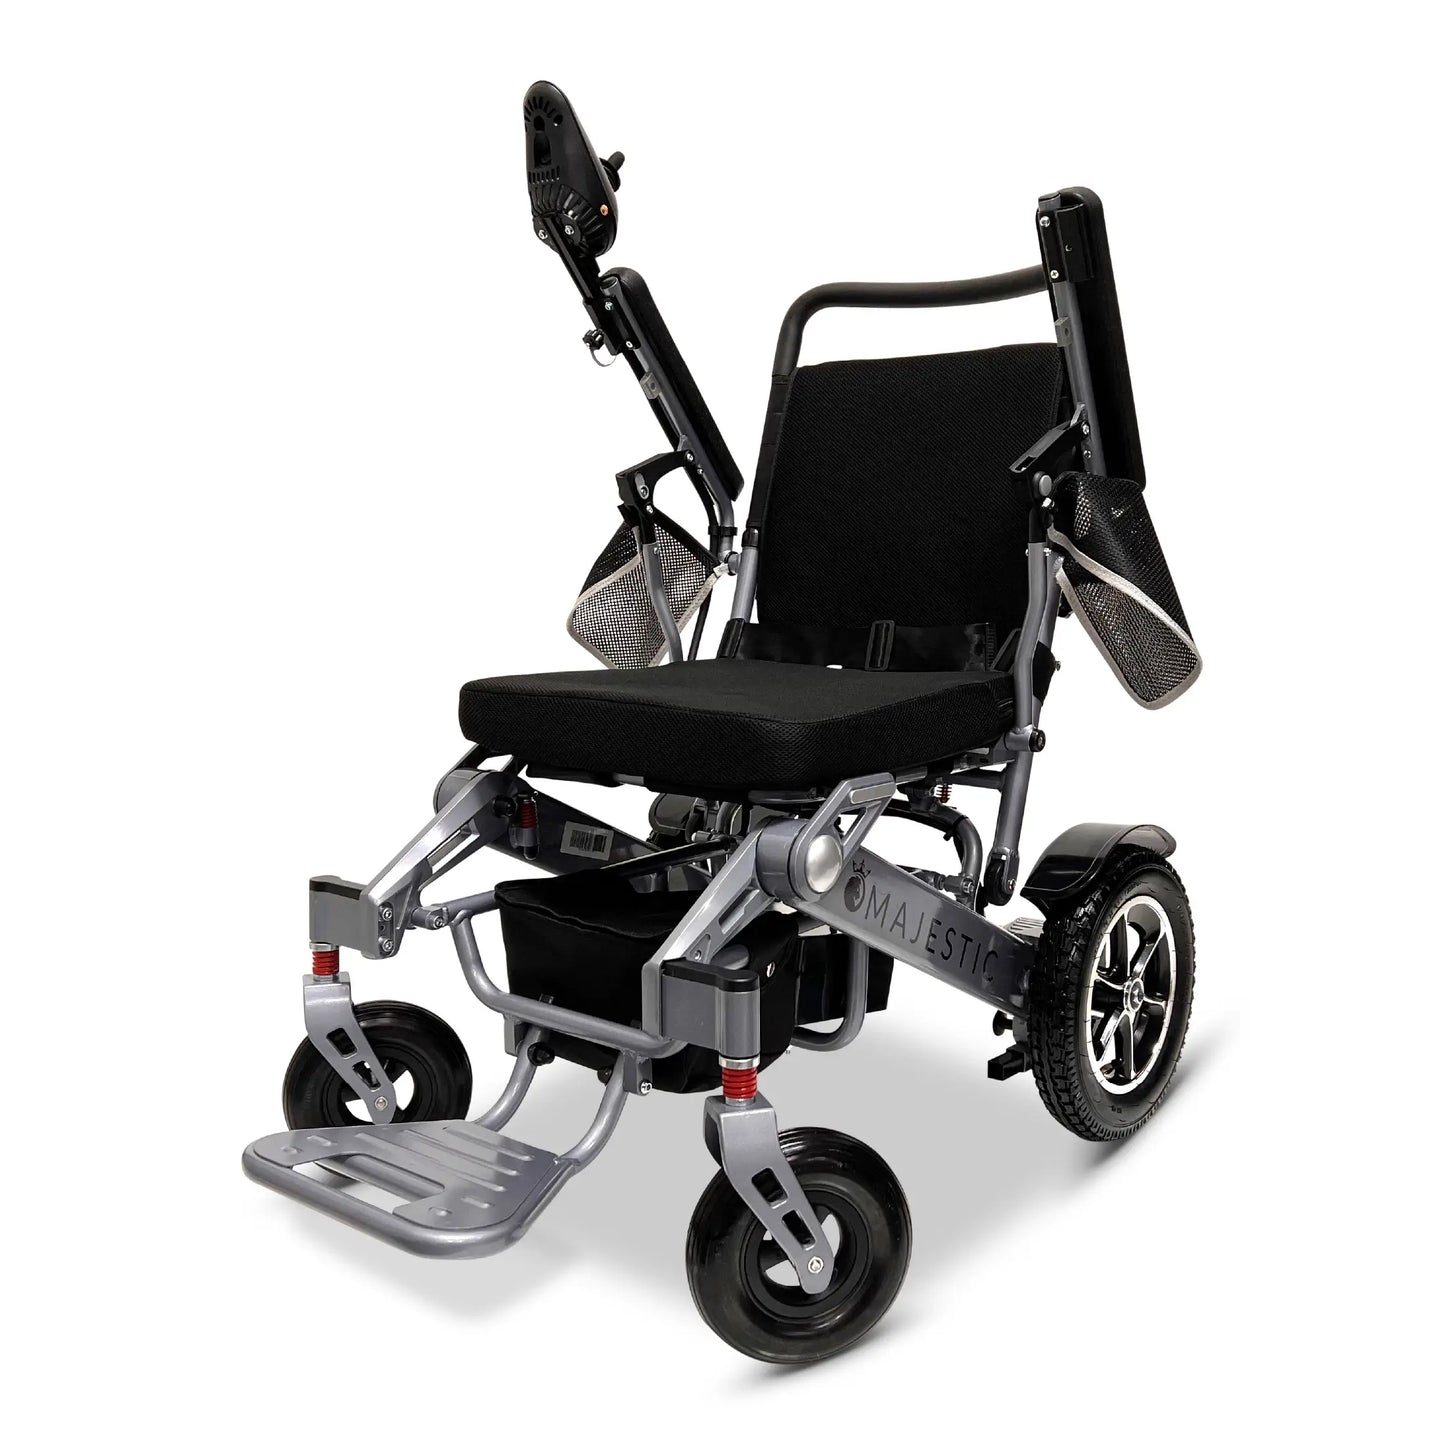 This electric wheelchair can traverse terrains such as grass, ramps, brick, mud, snow, and bumpy roads. 